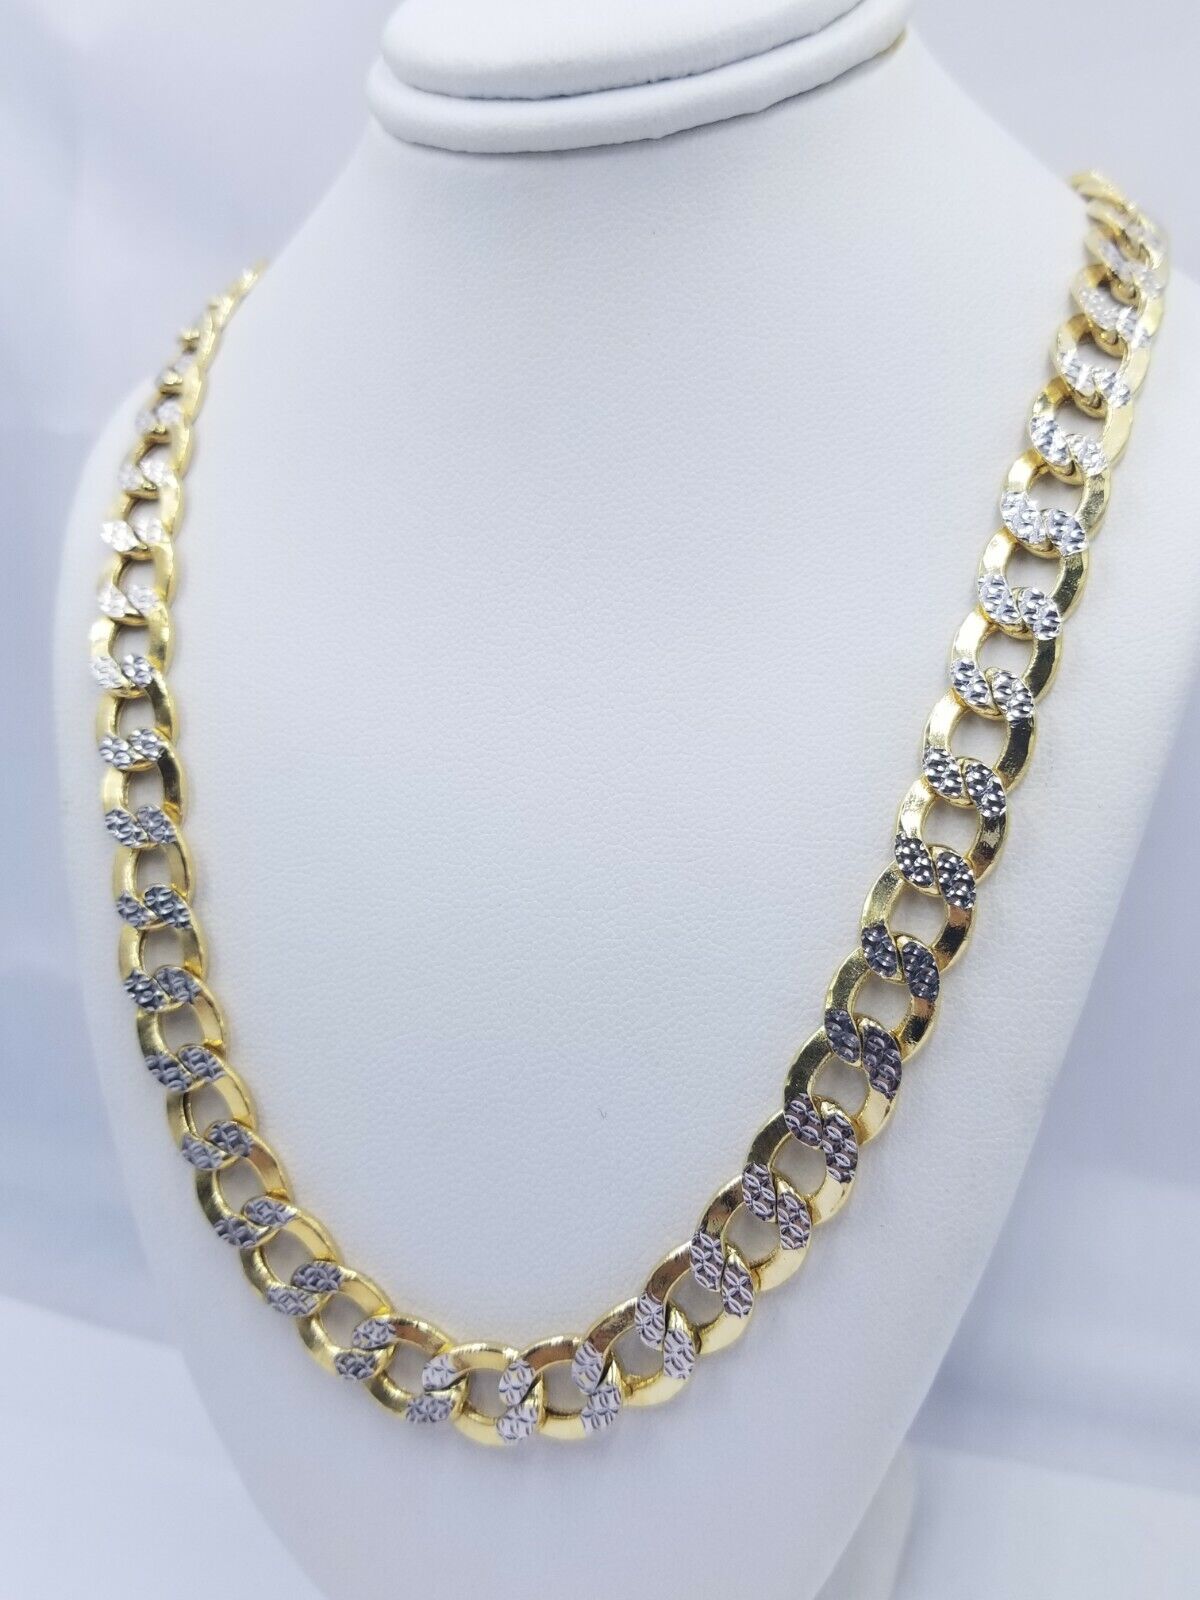 10MM Real Gold Mens Necklace Cuban Link 20-28" Diamond Cut 10k Yellow Gold Chain